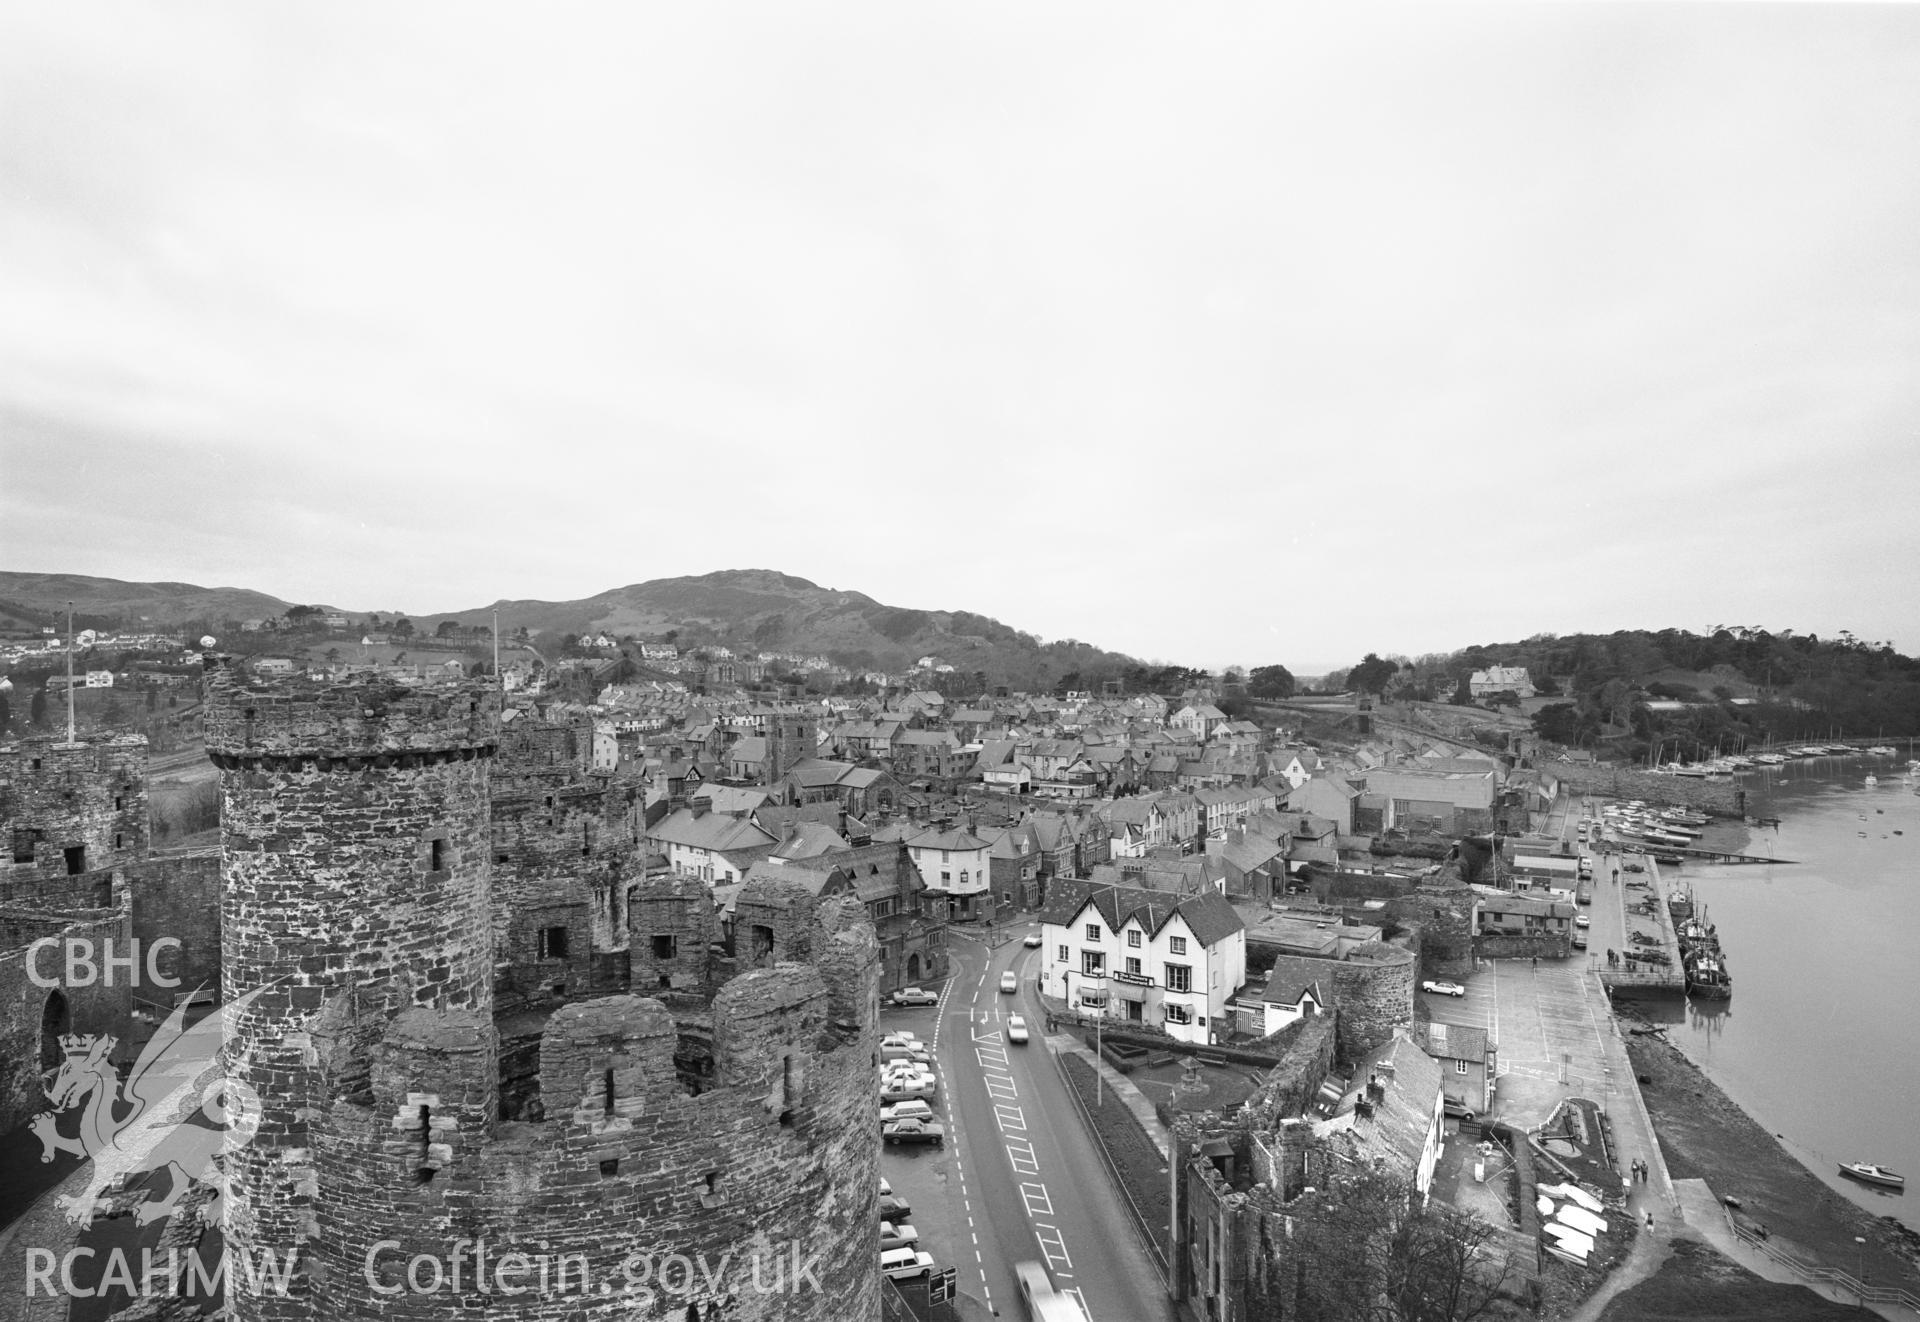 Photographic negative showing view of Harlech from the castle; collated by the former Central Office of Information.